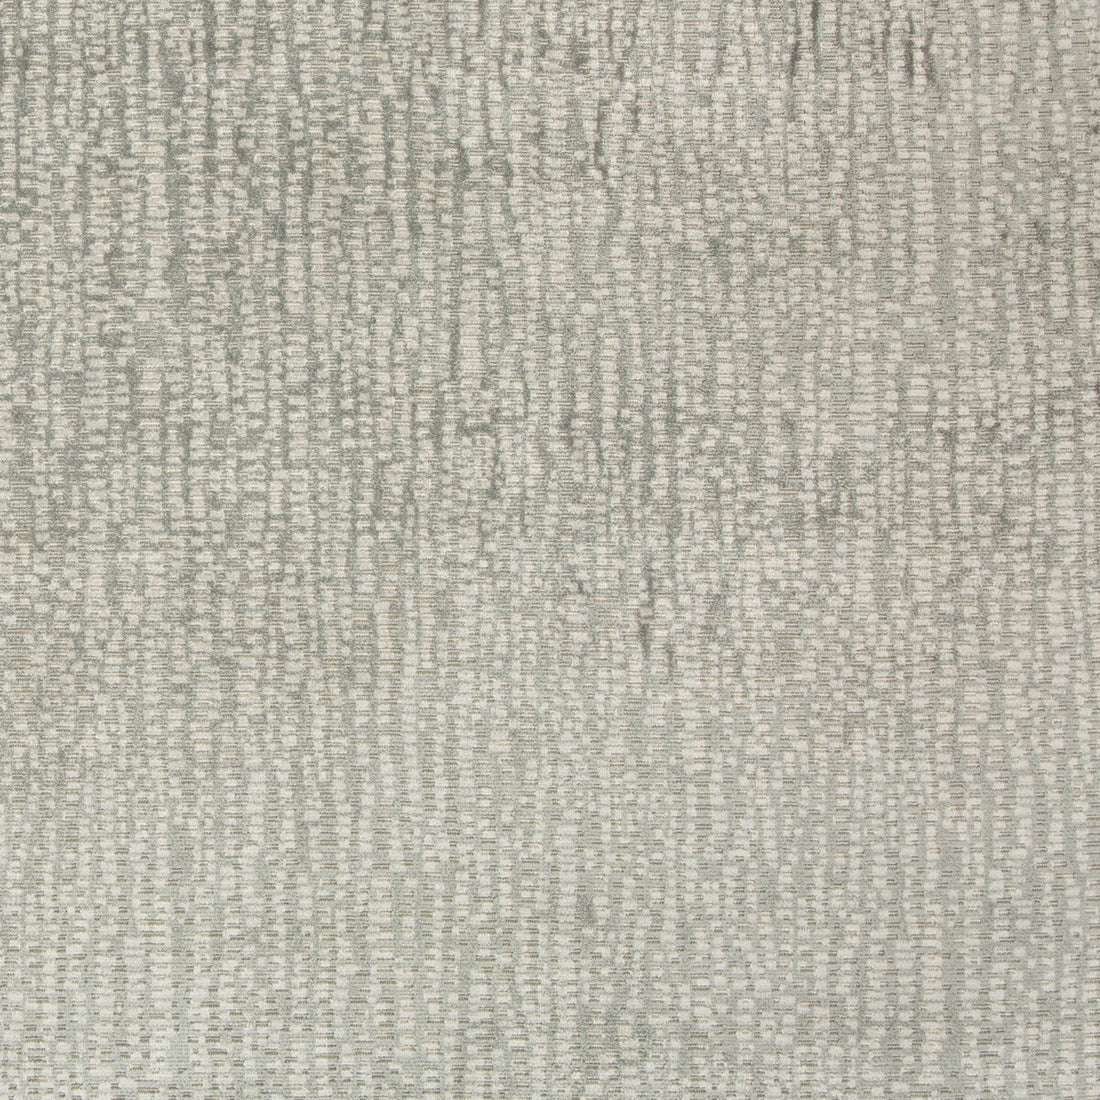 Stepping Stones fabric in platinum color - pattern 34788.11.0 - by Kravet Couture in the Artisan Velvets collection